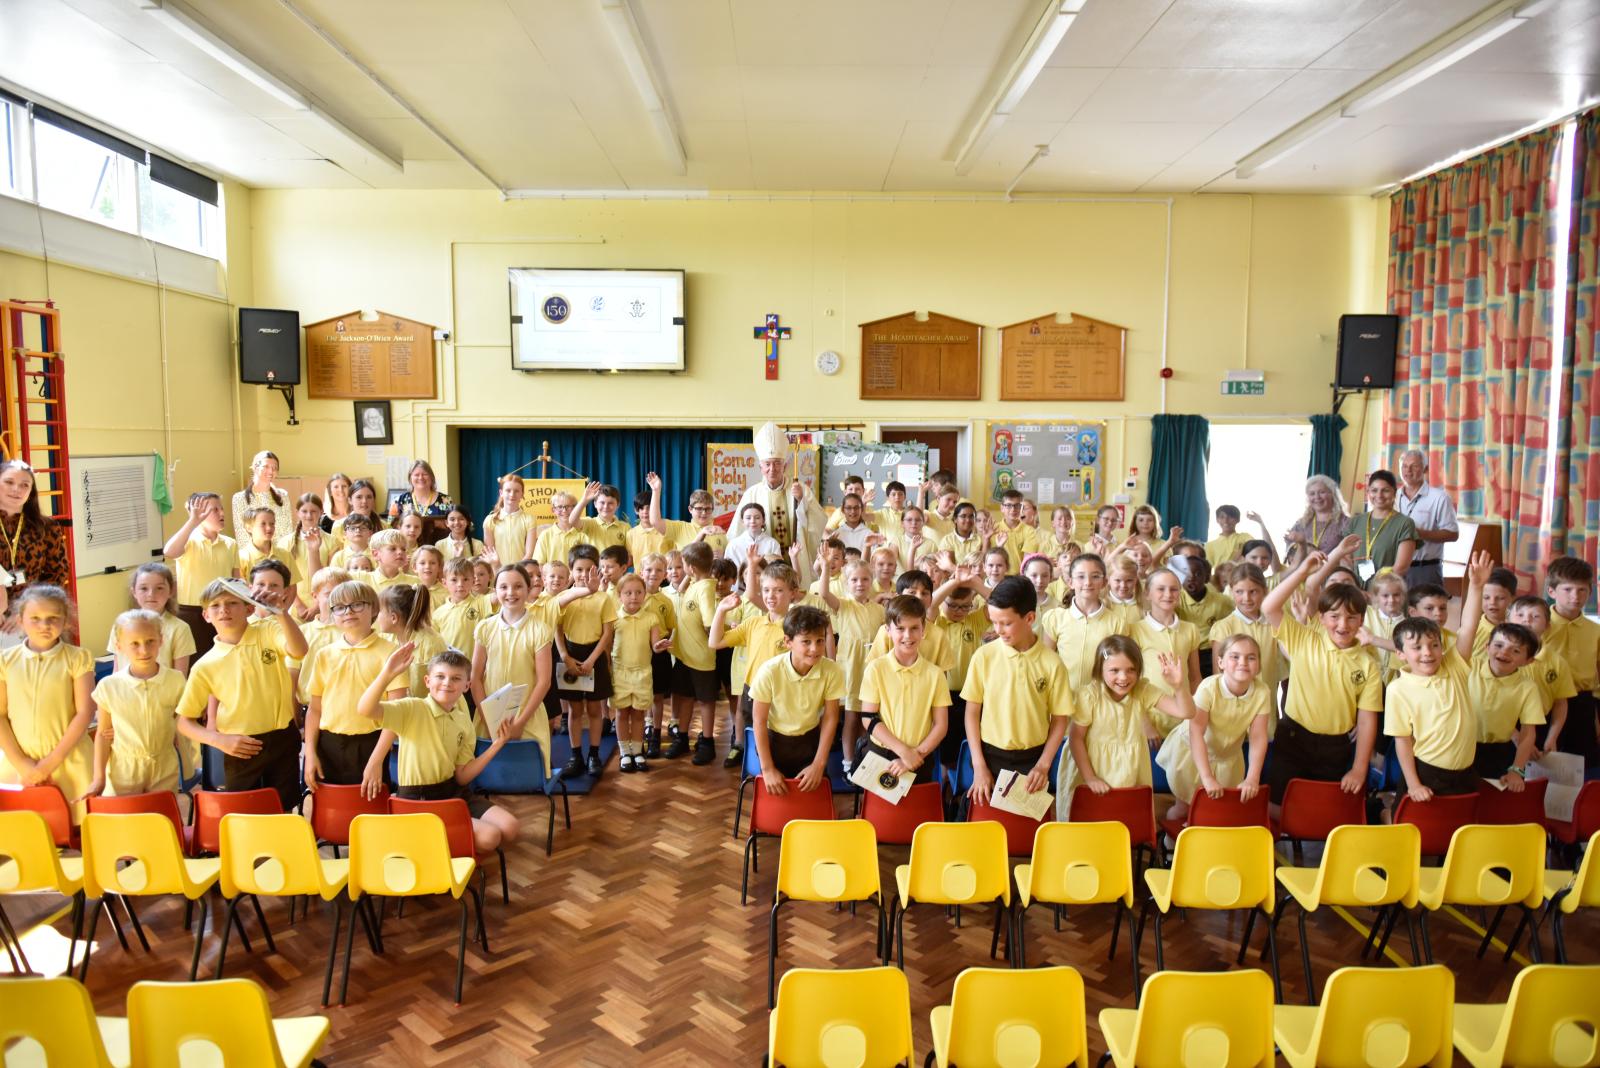 Primary school marks 150 years of education - Diocese of Westminster